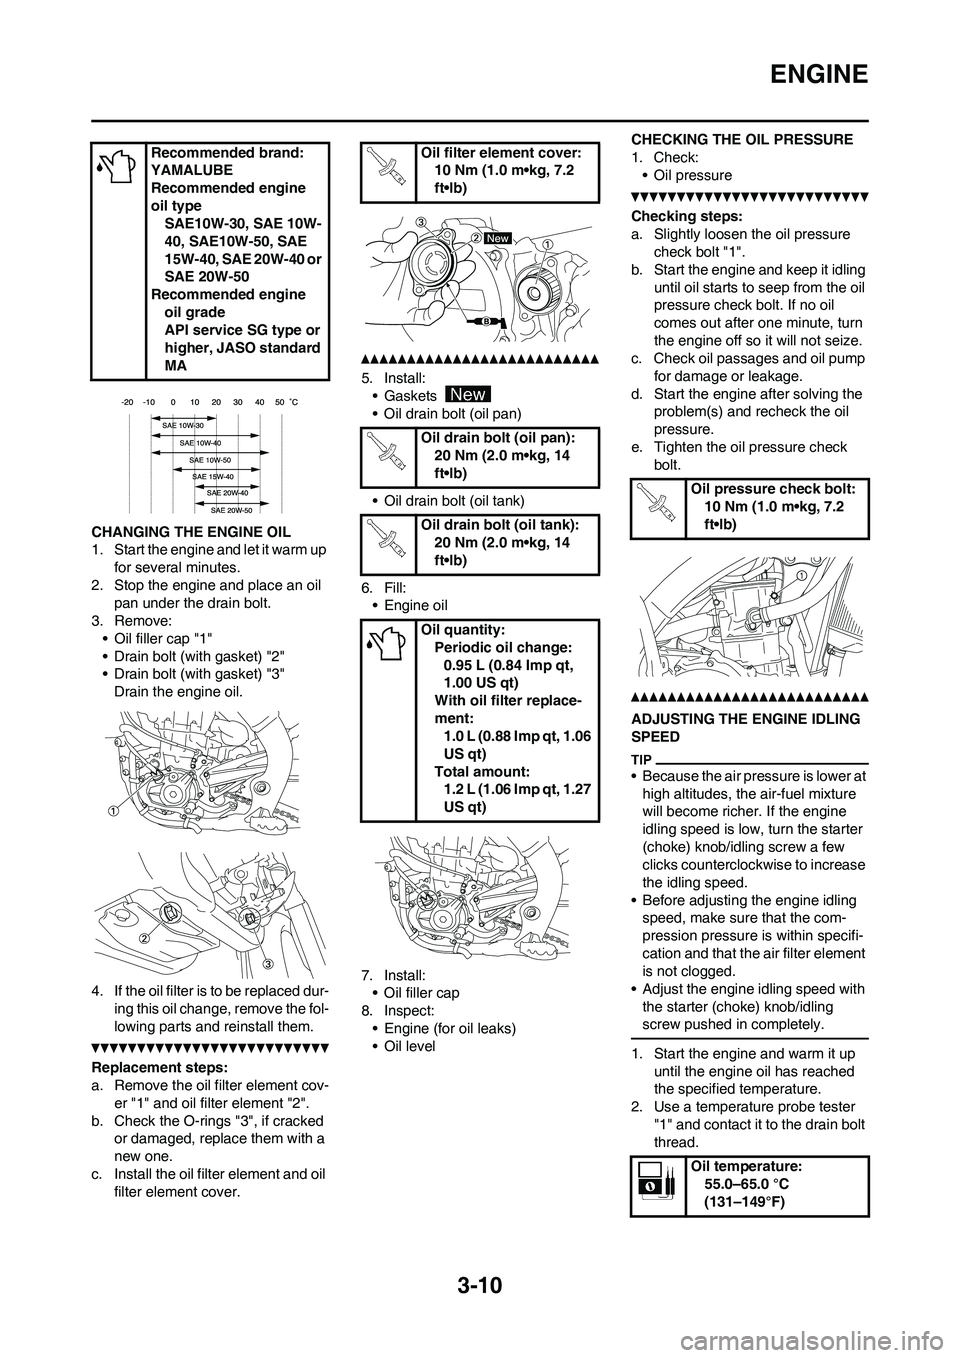 YAMAHA YZ450F 2010  Owners Manual 
3-10
ENGINE
CHANGING THE ENGINE OIL
1. Start the engine and let it warm up for several minutes.
2. Stop the engine and place an oil  pan under the drain bolt.
3. Remove: • Oil filler cap "1"
• Dr